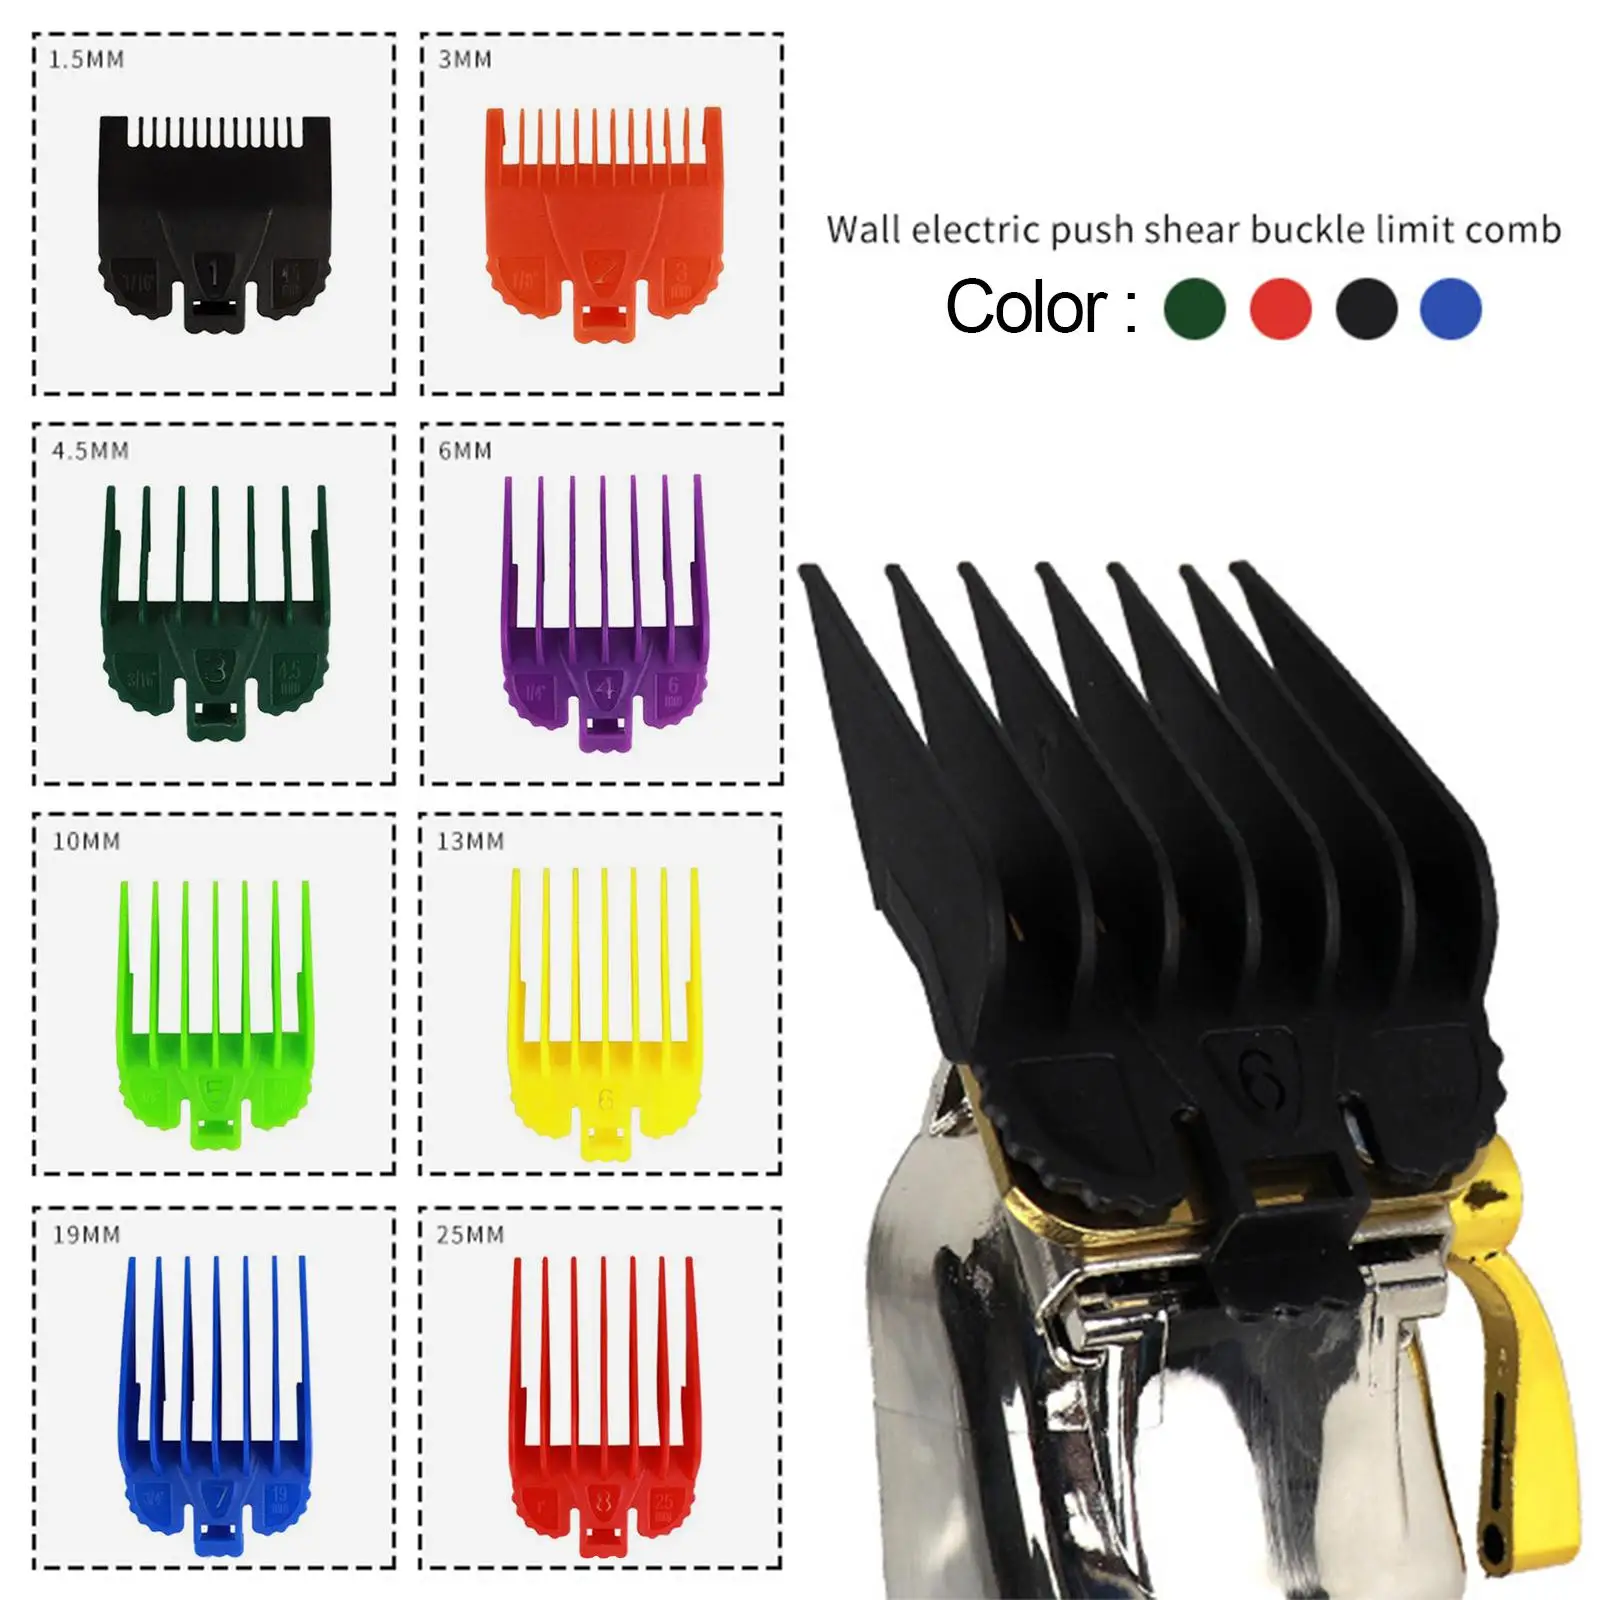 8 Piece/Set Hair Hair Guards Combs Attachment Barber Tool